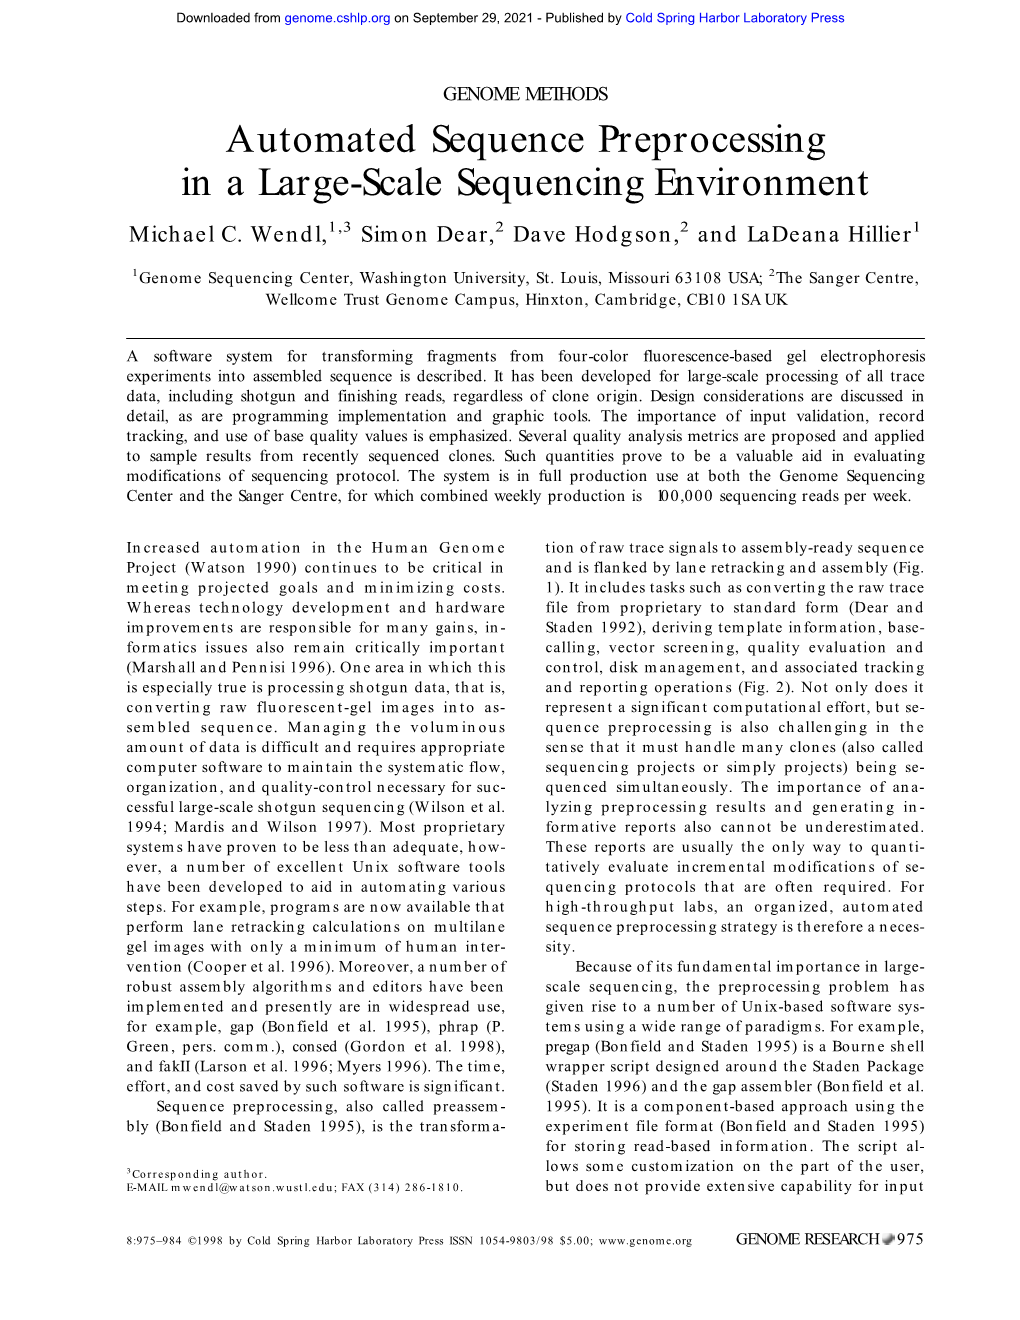 Automated Sequence Preprocessing in a Large-Scale Sequencing Environment Michael C